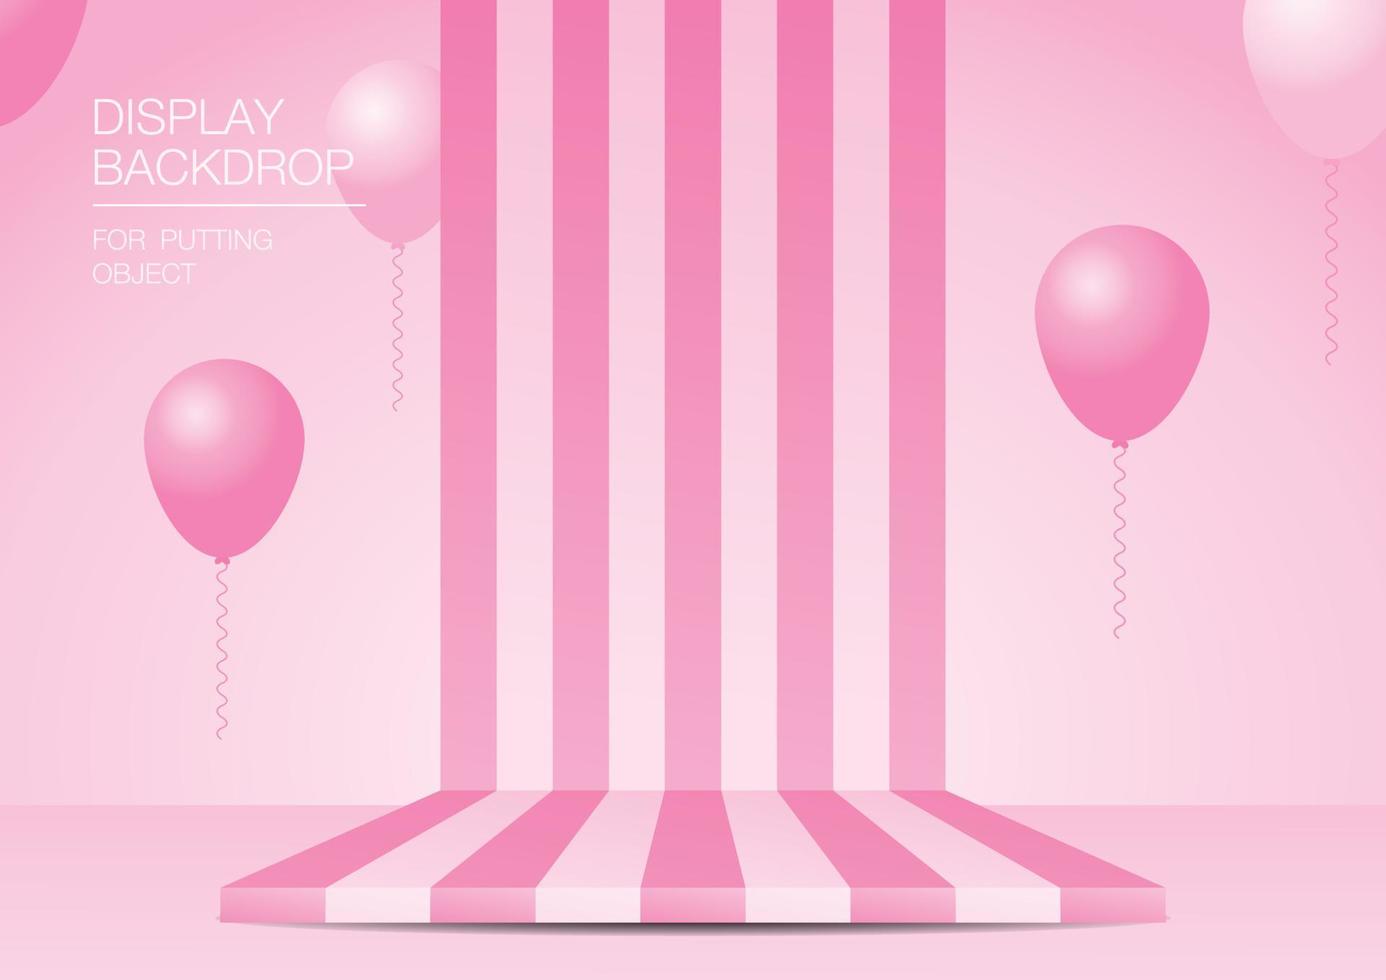 pink striped pattern backdrop display 3d illustration vector with balloons on sweet pastel background for putting your object